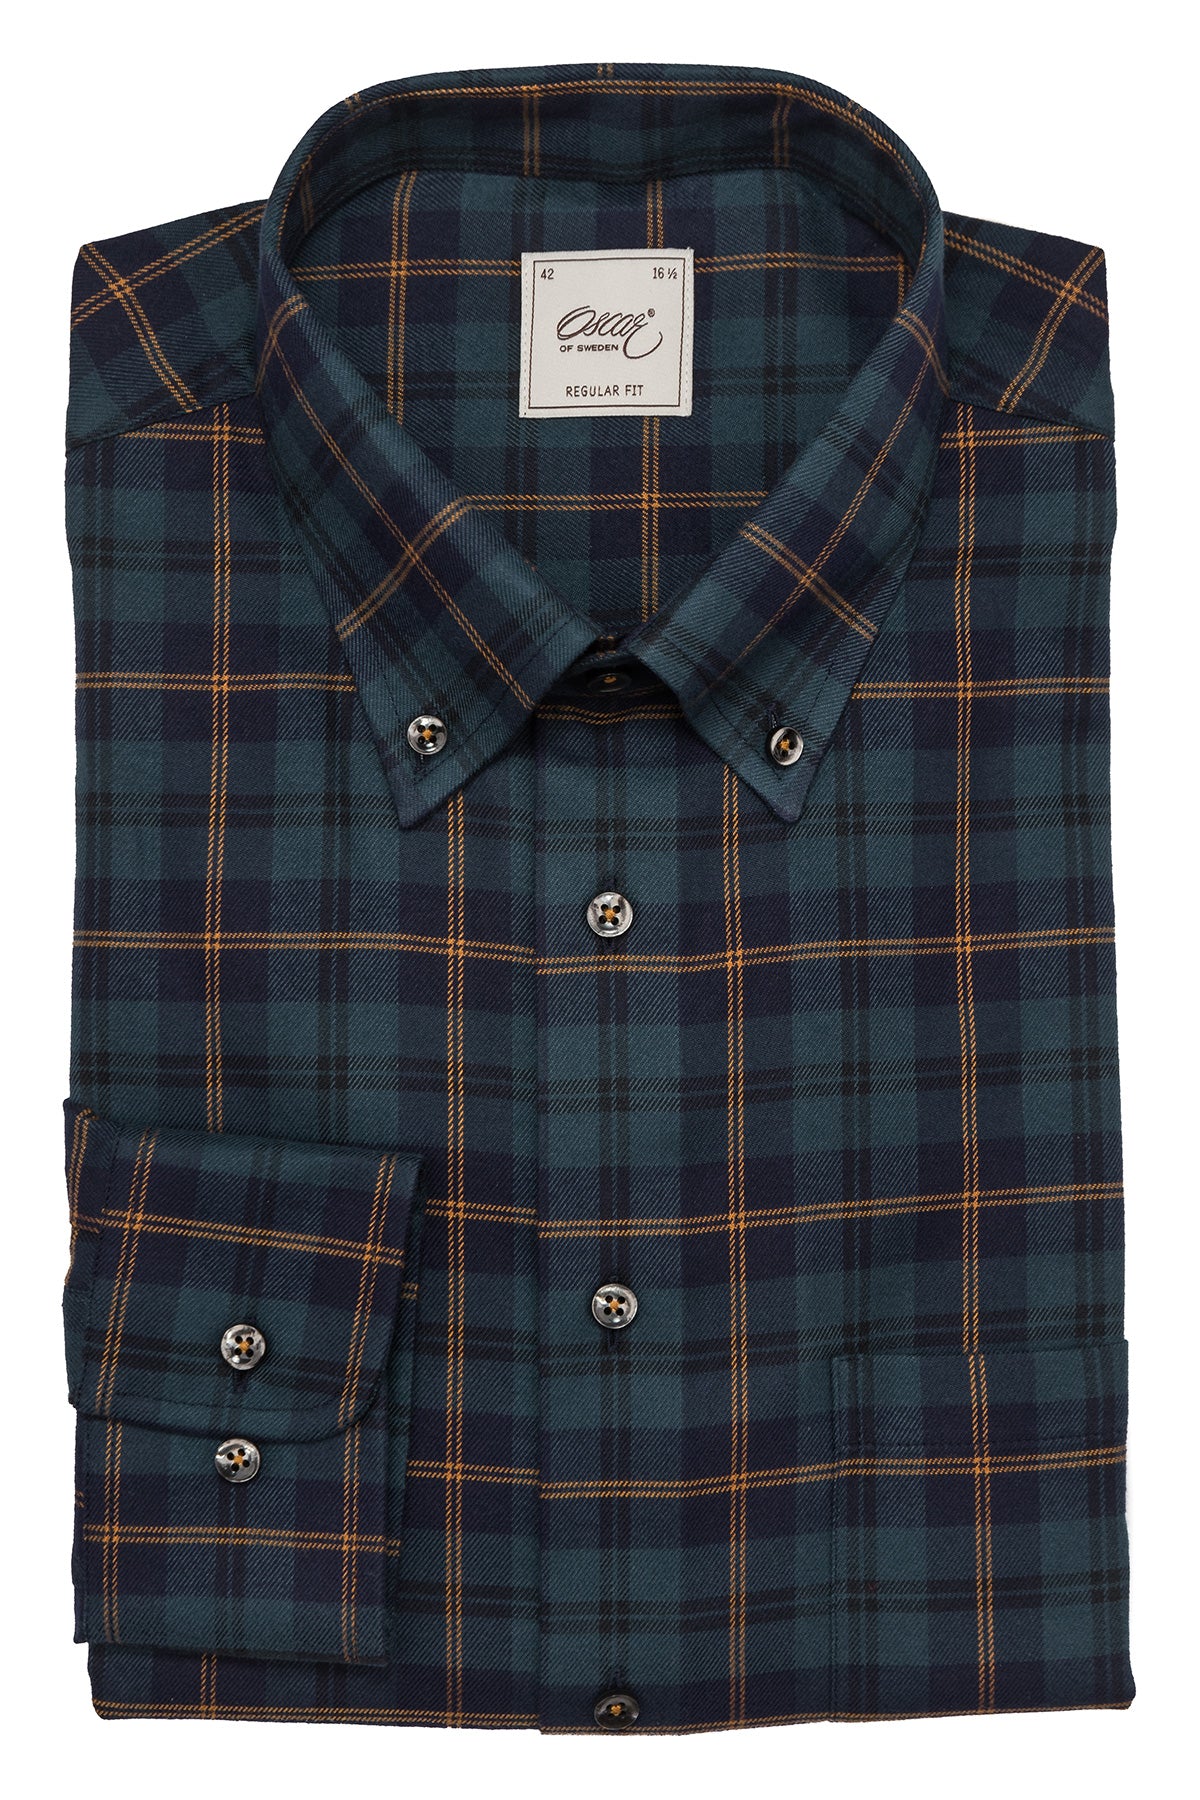 Green checked flannel button down regular fit shirt